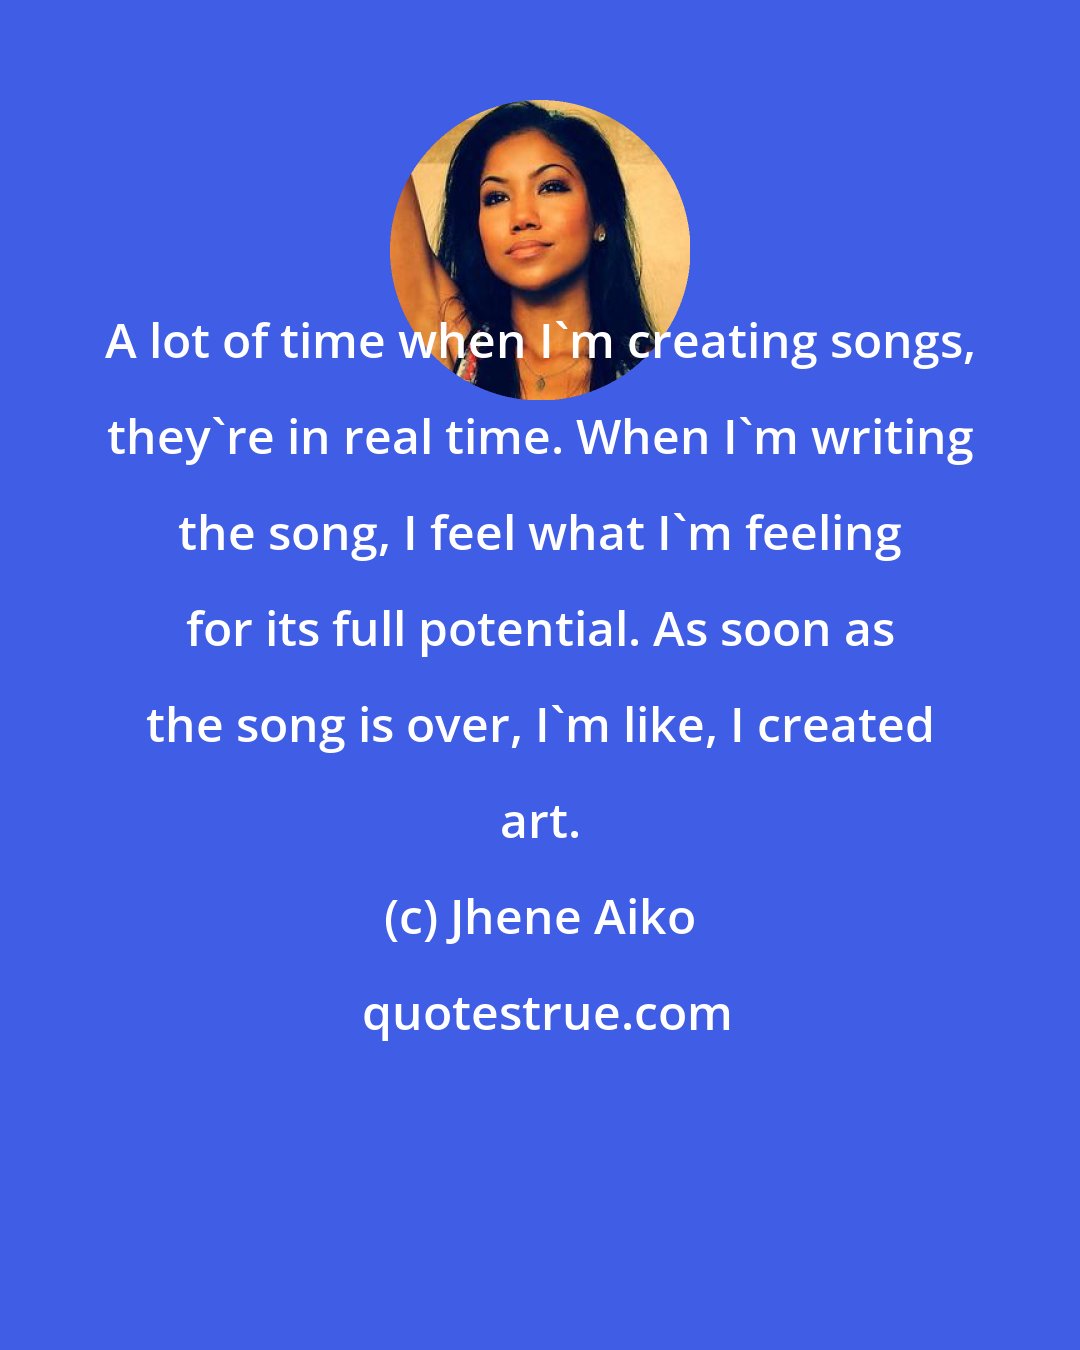 Jhene Aiko: A lot of time when I'm creating songs, they're in real time. When I'm writing the song, I feel what I'm feeling for its full potential. As soon as the song is over, I'm like, I created art.